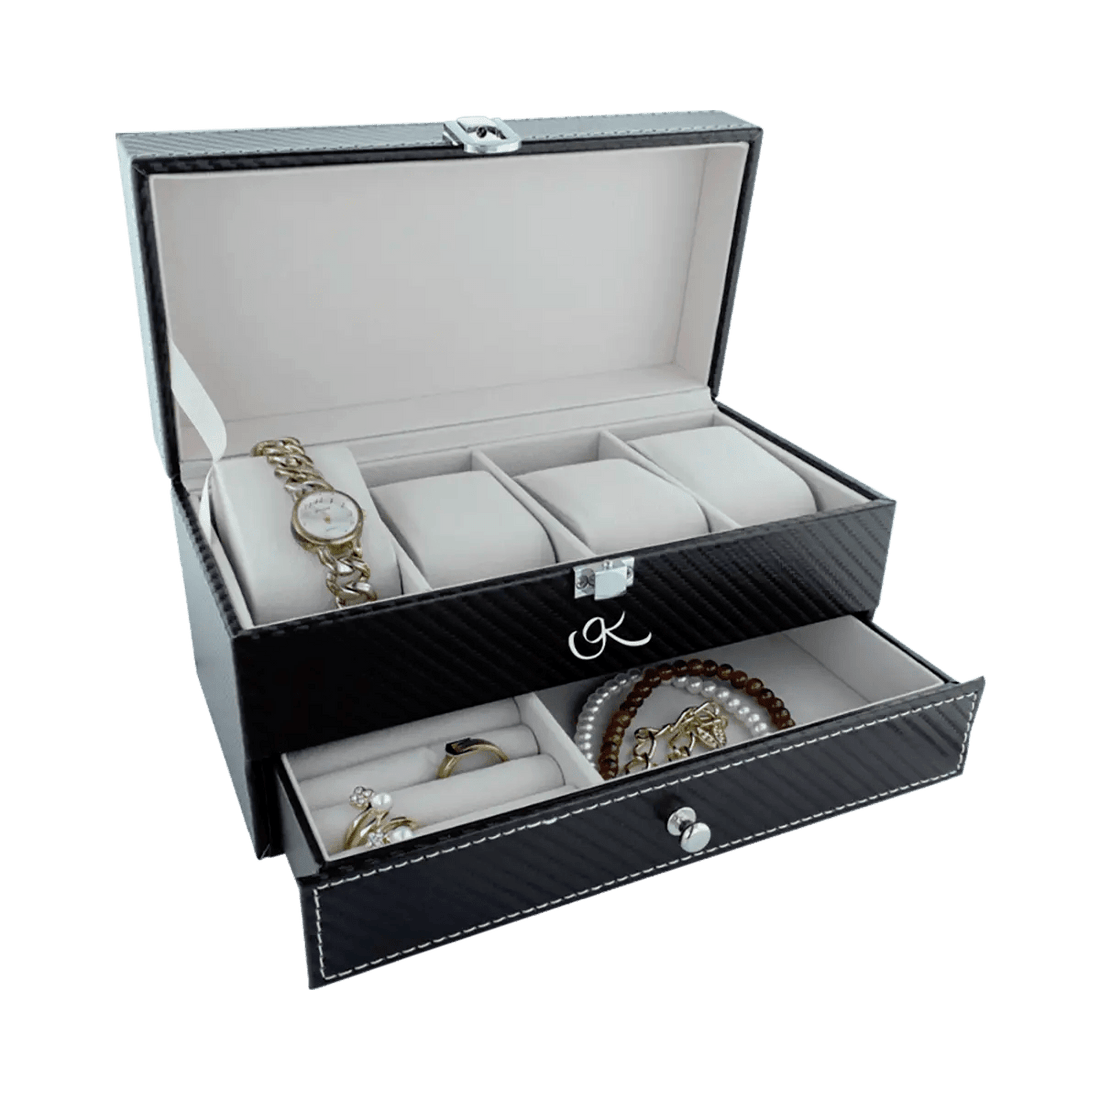 Large Vinyl Jewlery And Watch Box For Men And Women